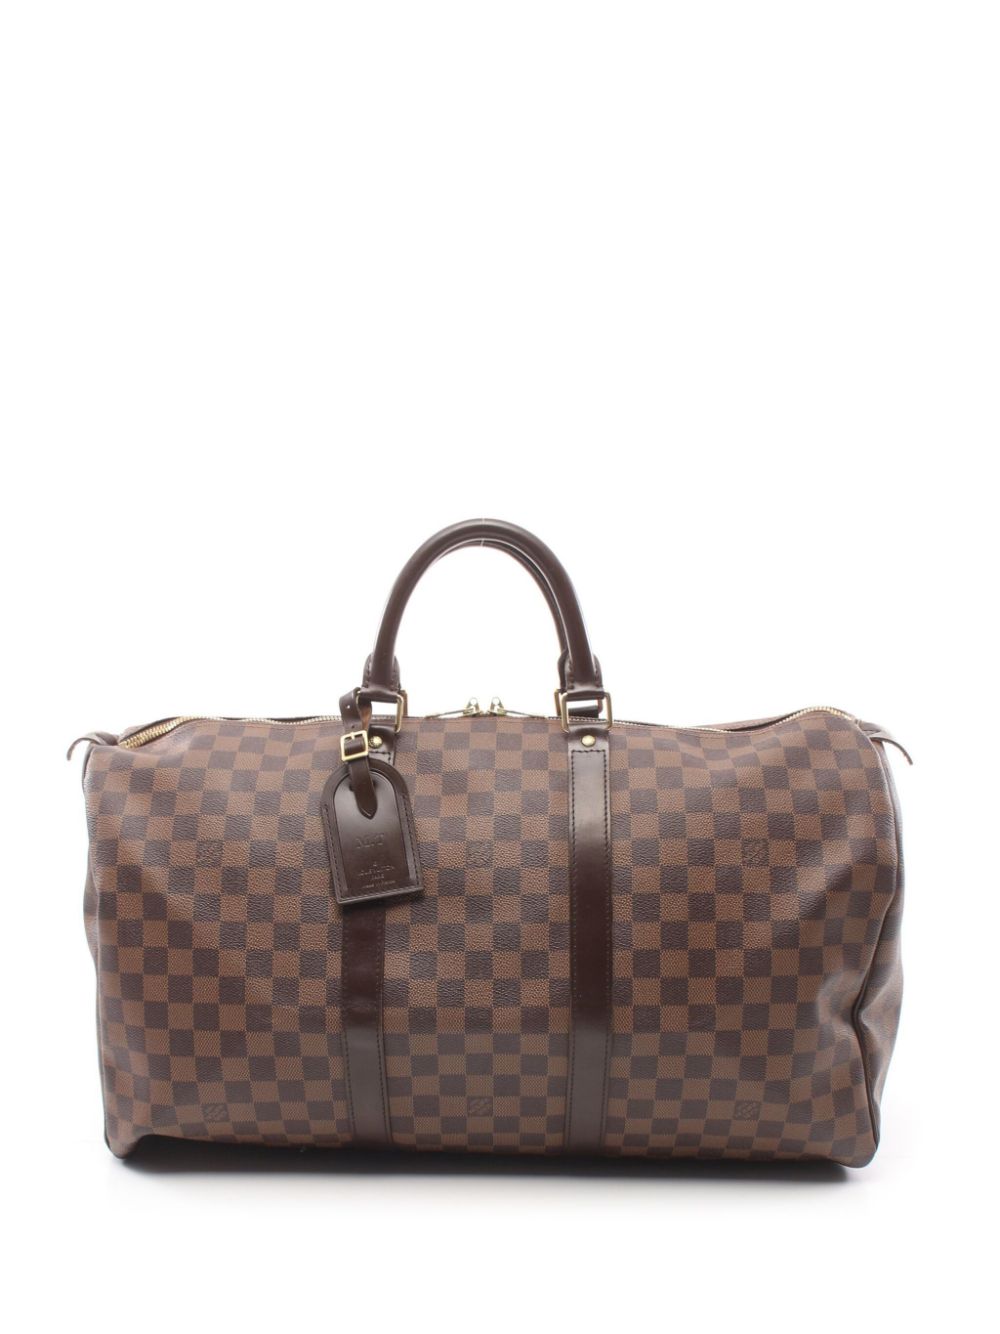 Pre-owned Louis Vuitton 2008 Keepall 50 Duffle Bag In Brown